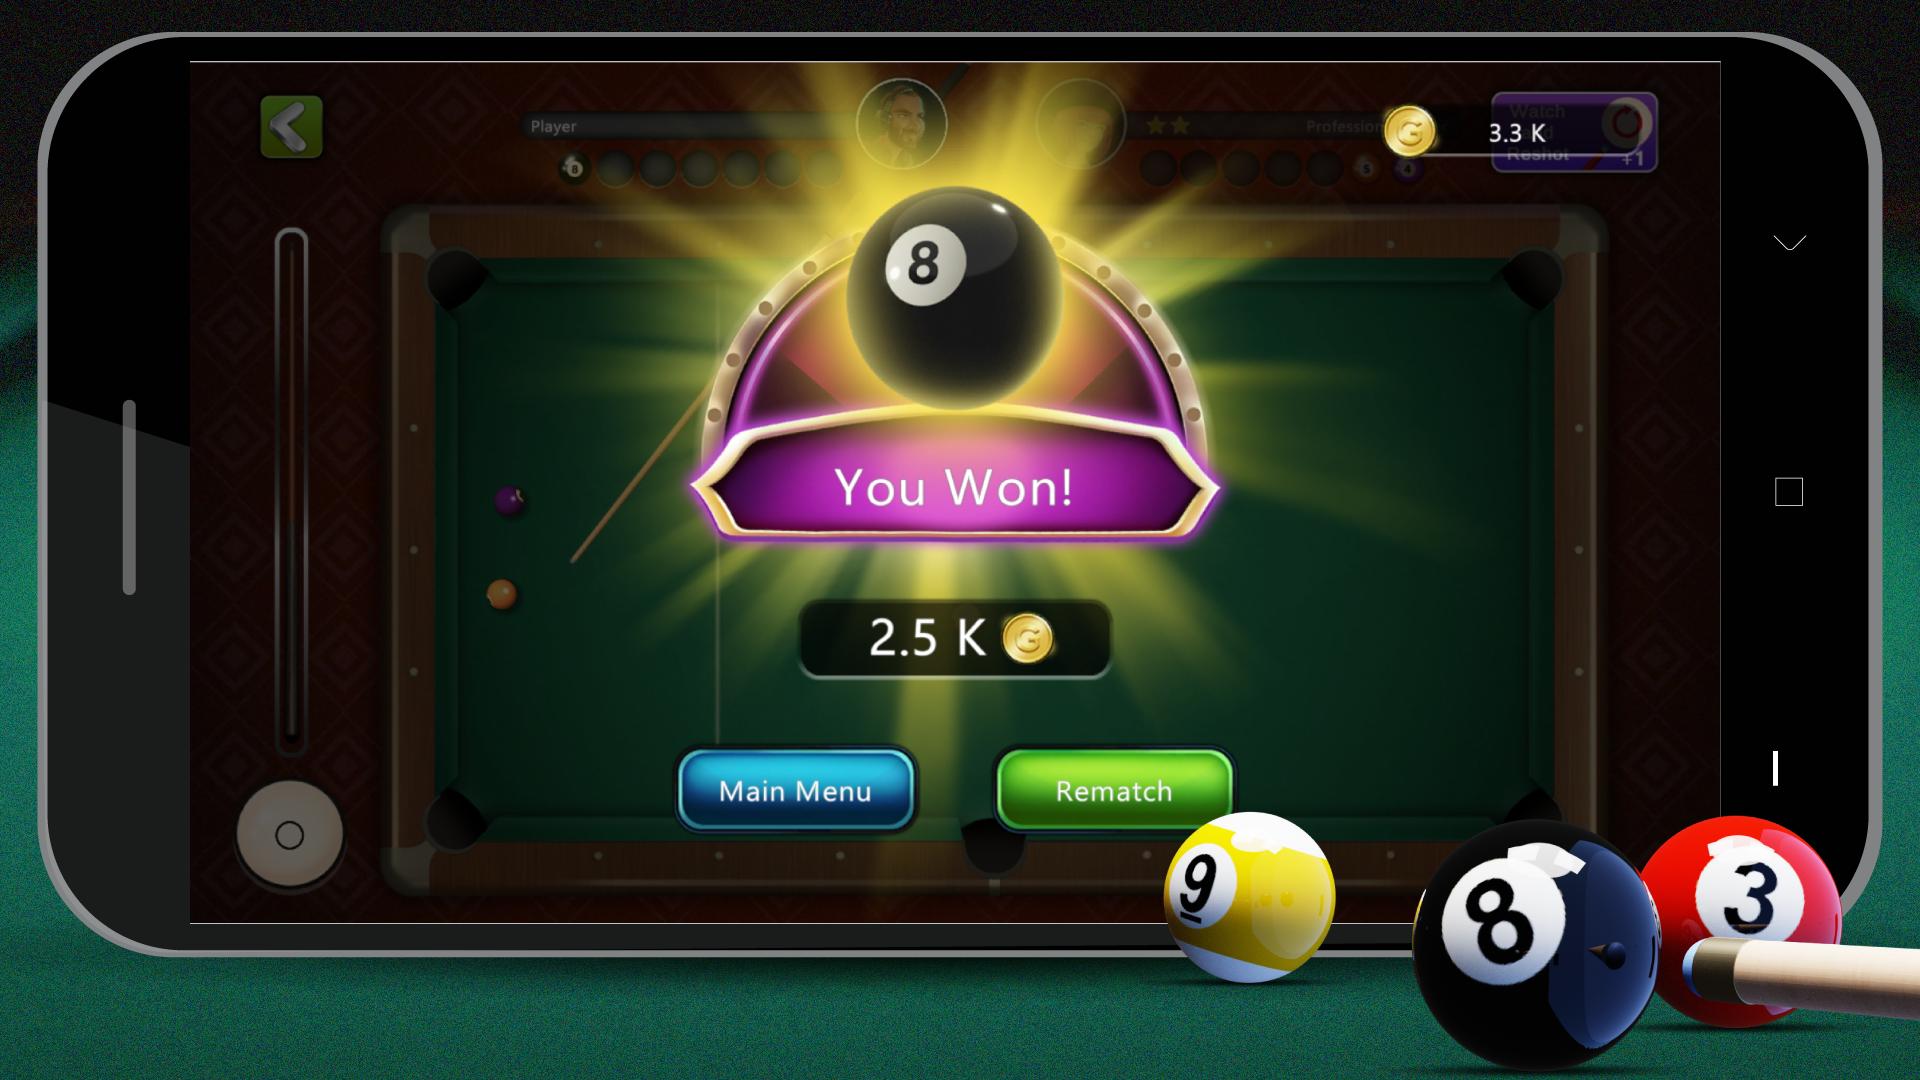 8 Ball Billiards Offline Free Pool Game For Android Apk Download